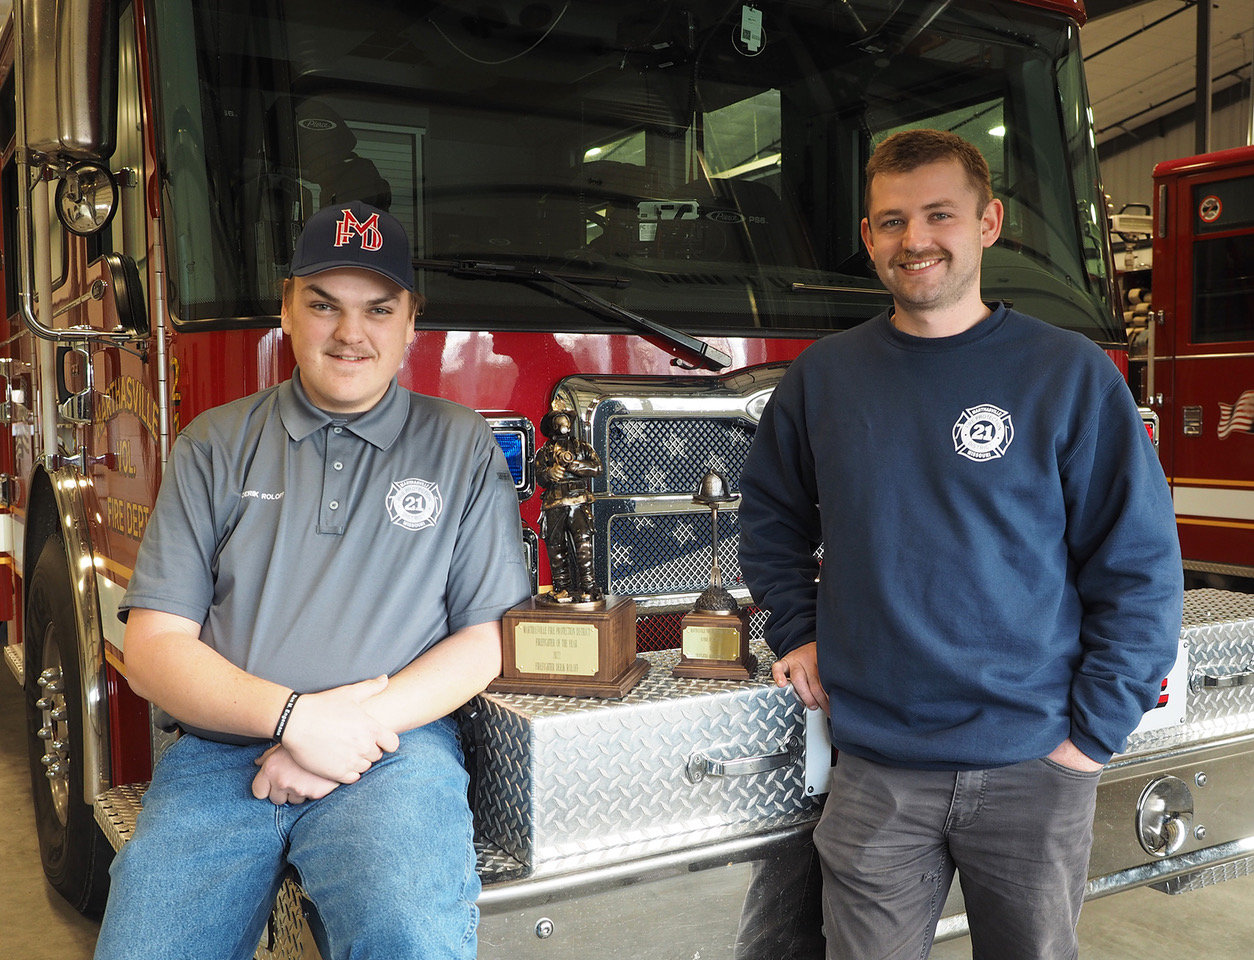 CHOSEN BY THEIR PEERS — Marthasville Fire Protection District held its annual awards banquet Saturday, Jan. 21. Top honors went to Derik Roloff, left, as Firefighter of the Year and Adam Hawkinson as Rookie of the Year. Roloff has been with the department since 2016 and this is the second time he has won the top firefighter award. Hawkinson joined in 2021 and has thrown himself into the vocation. Both firefighters were also honored for responding to the most calls, with Hawkinson in first place.